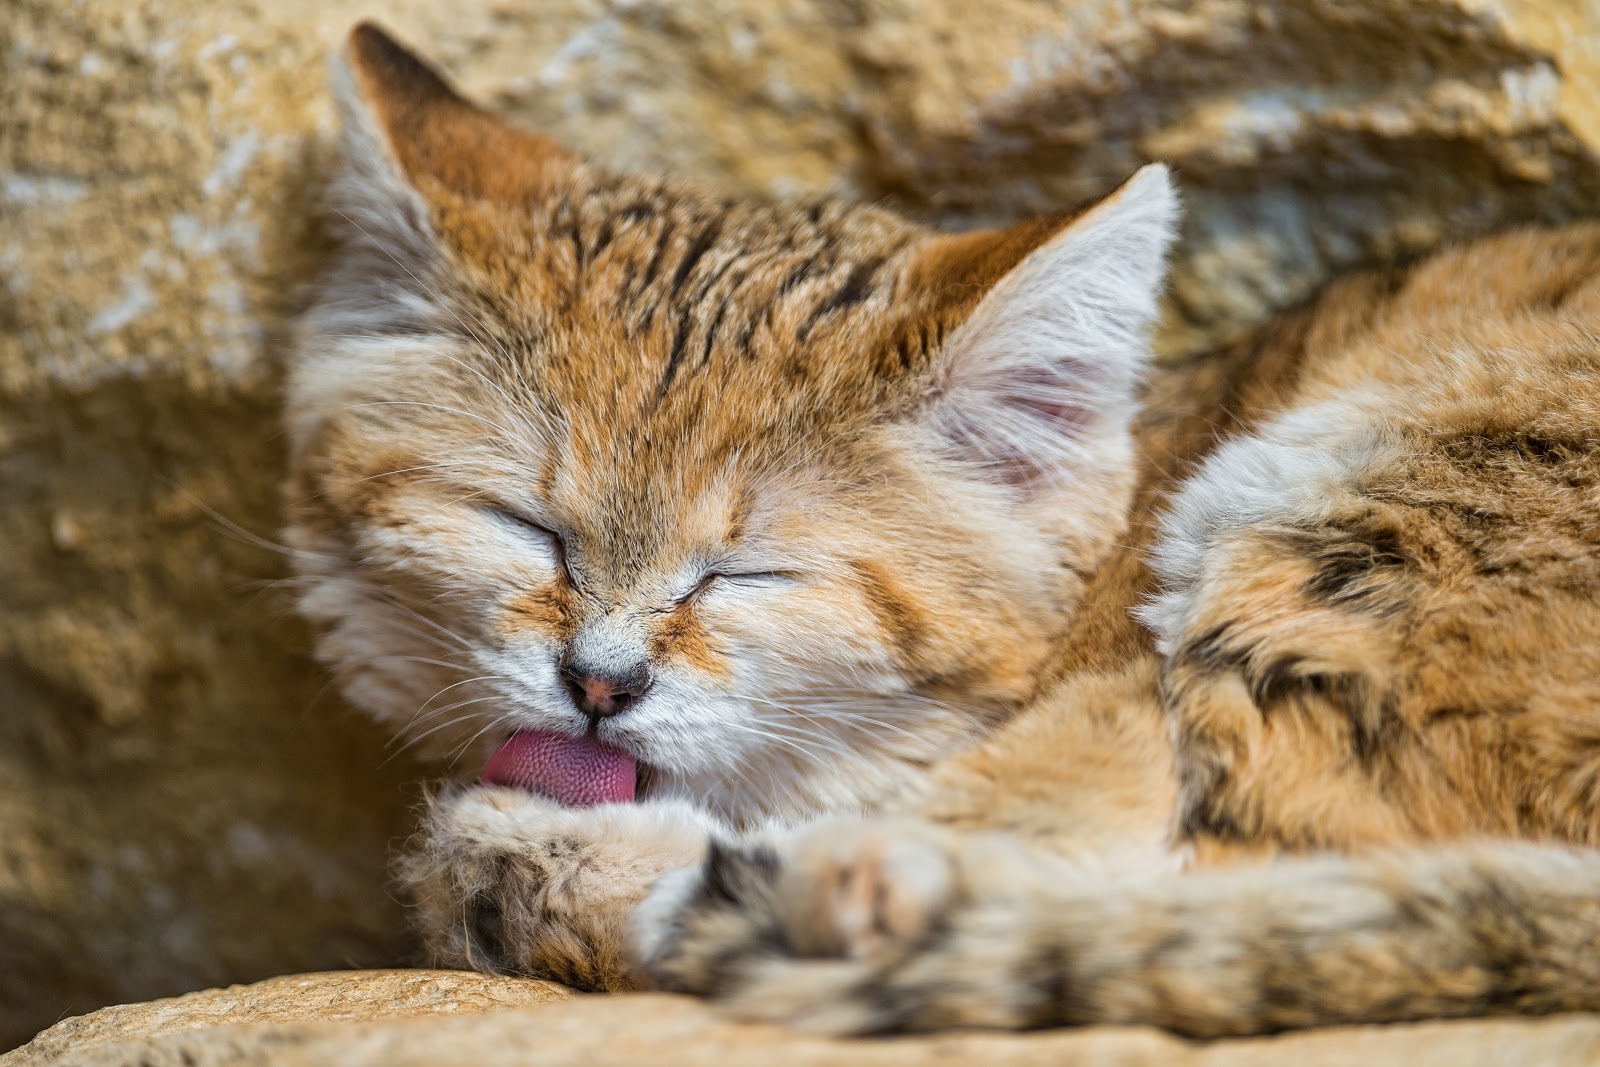 Sand cat licking his paw by Tambako the Jaguar from flickr (CC-ND)